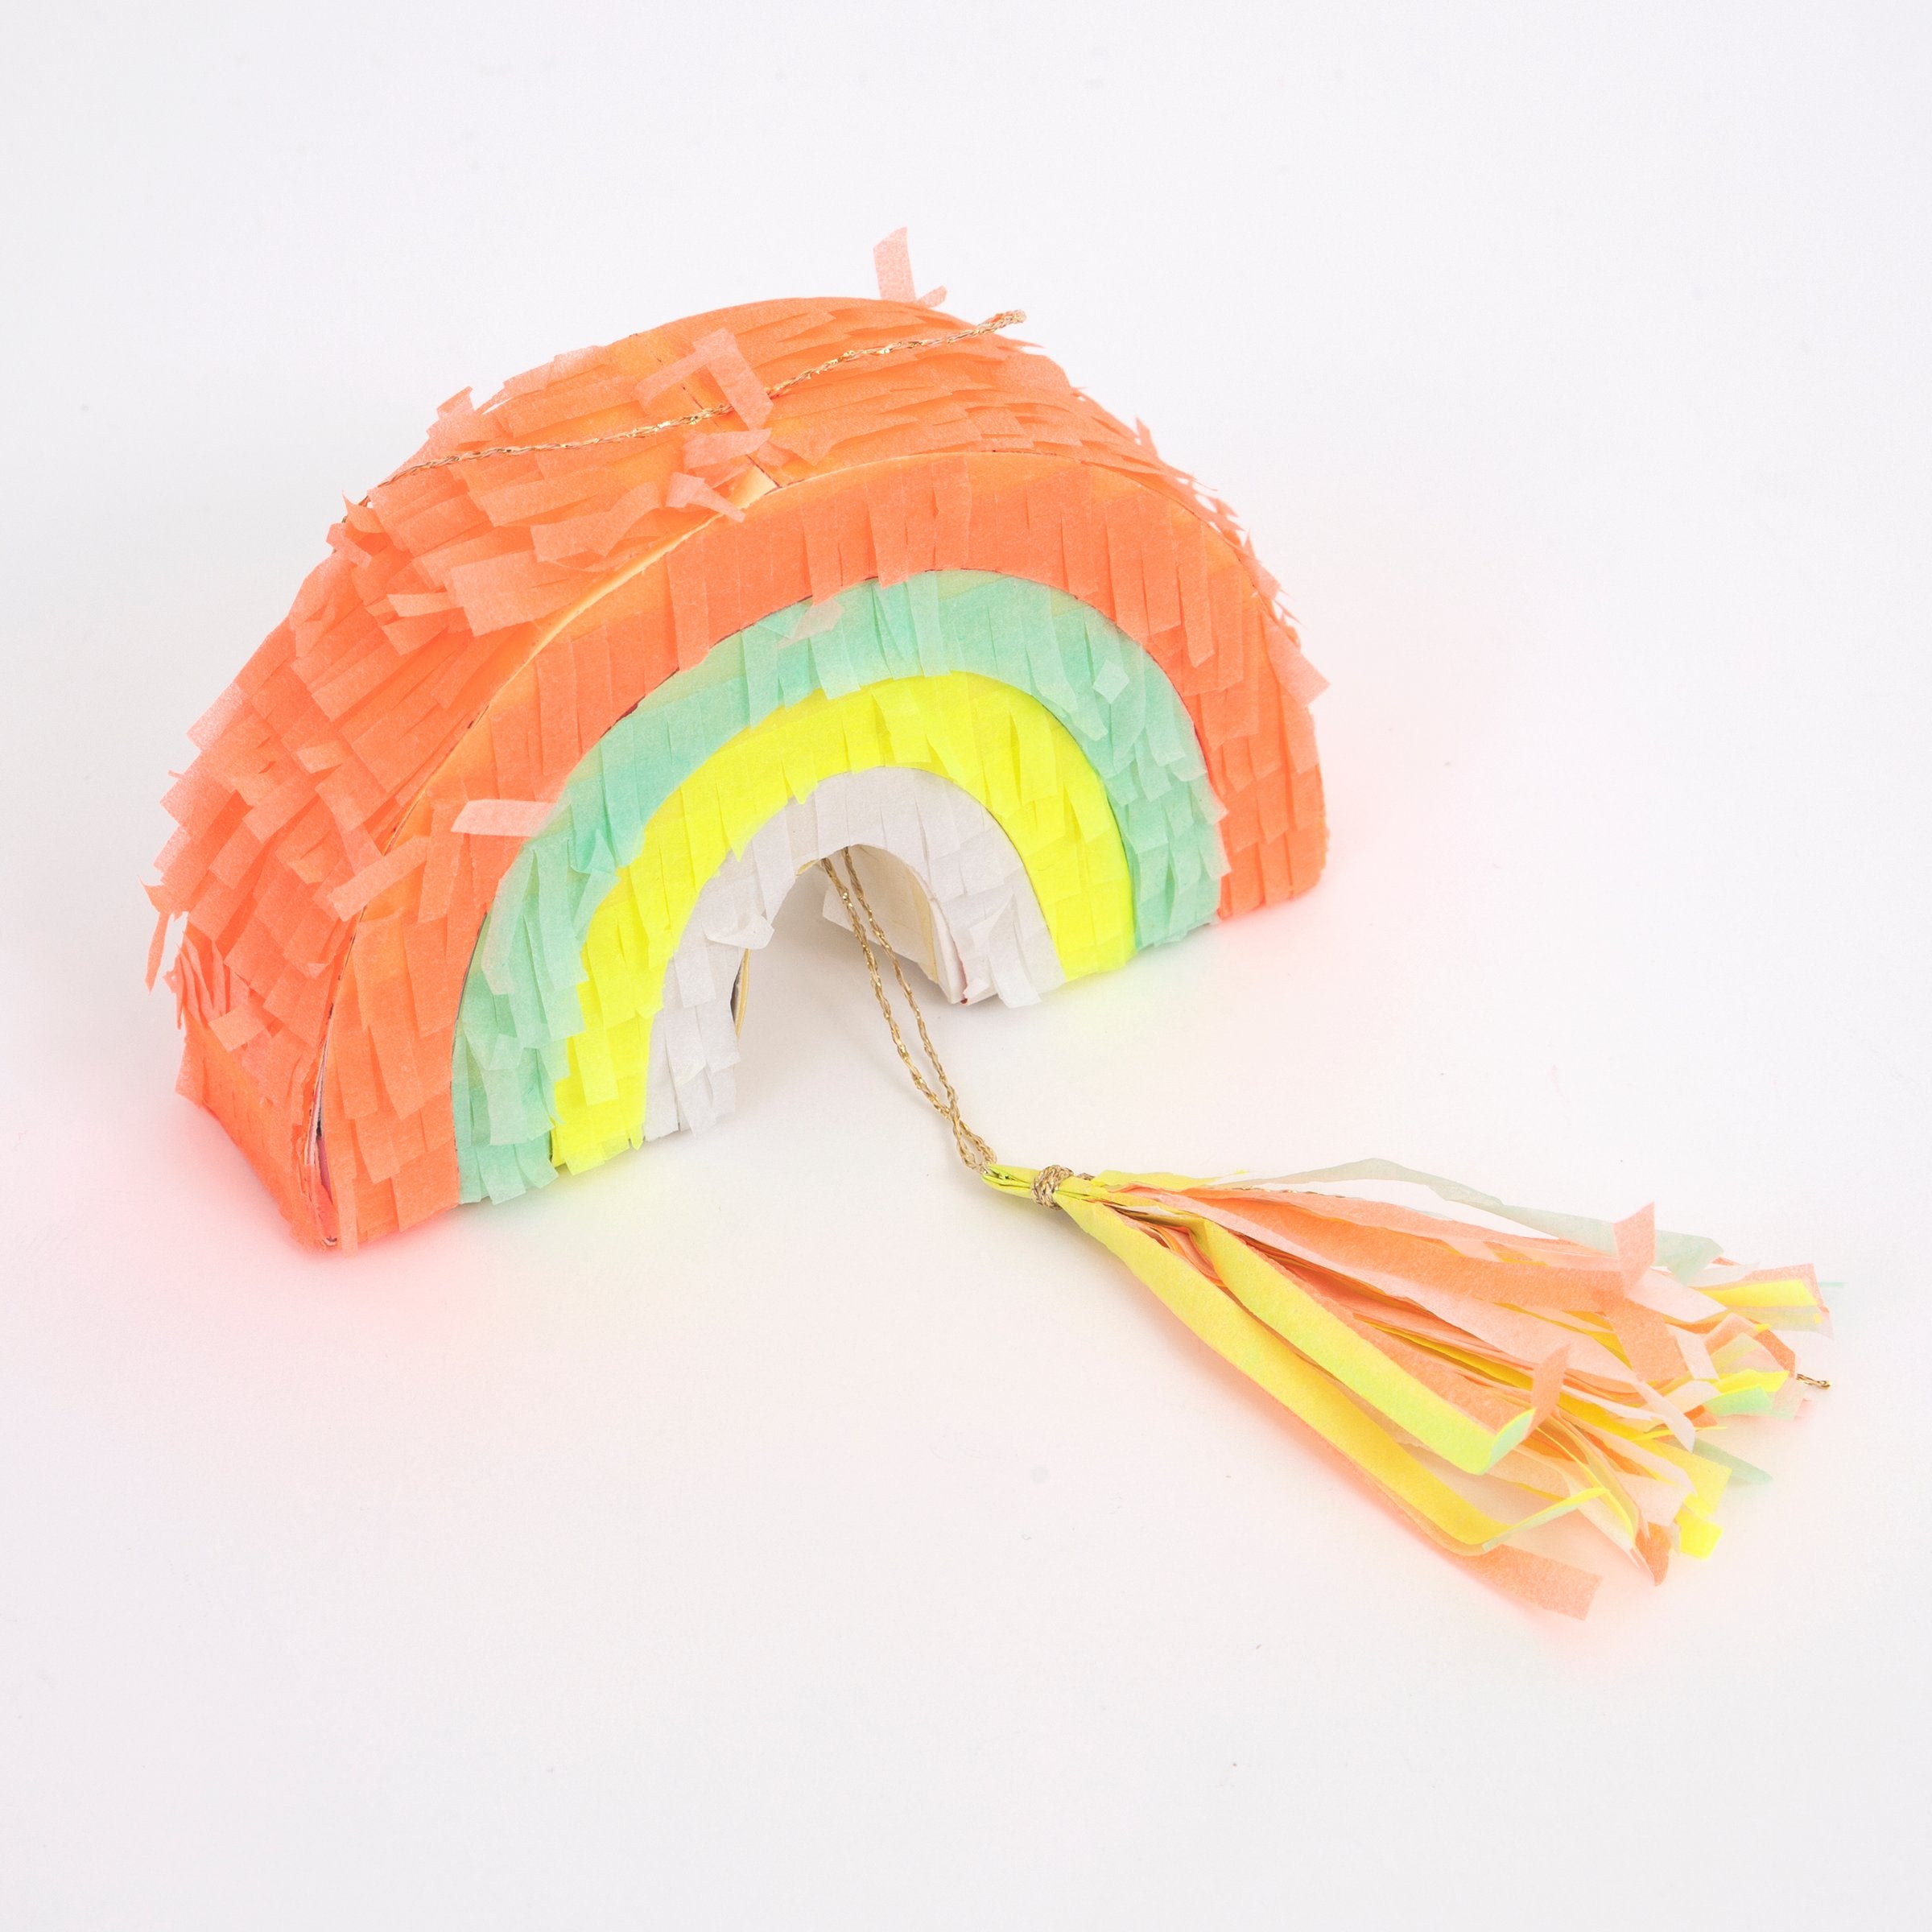 These mini pinatas, in the shape of a rainbow with a neon tassel, are filled with colourful confetti and temporary tattoos.